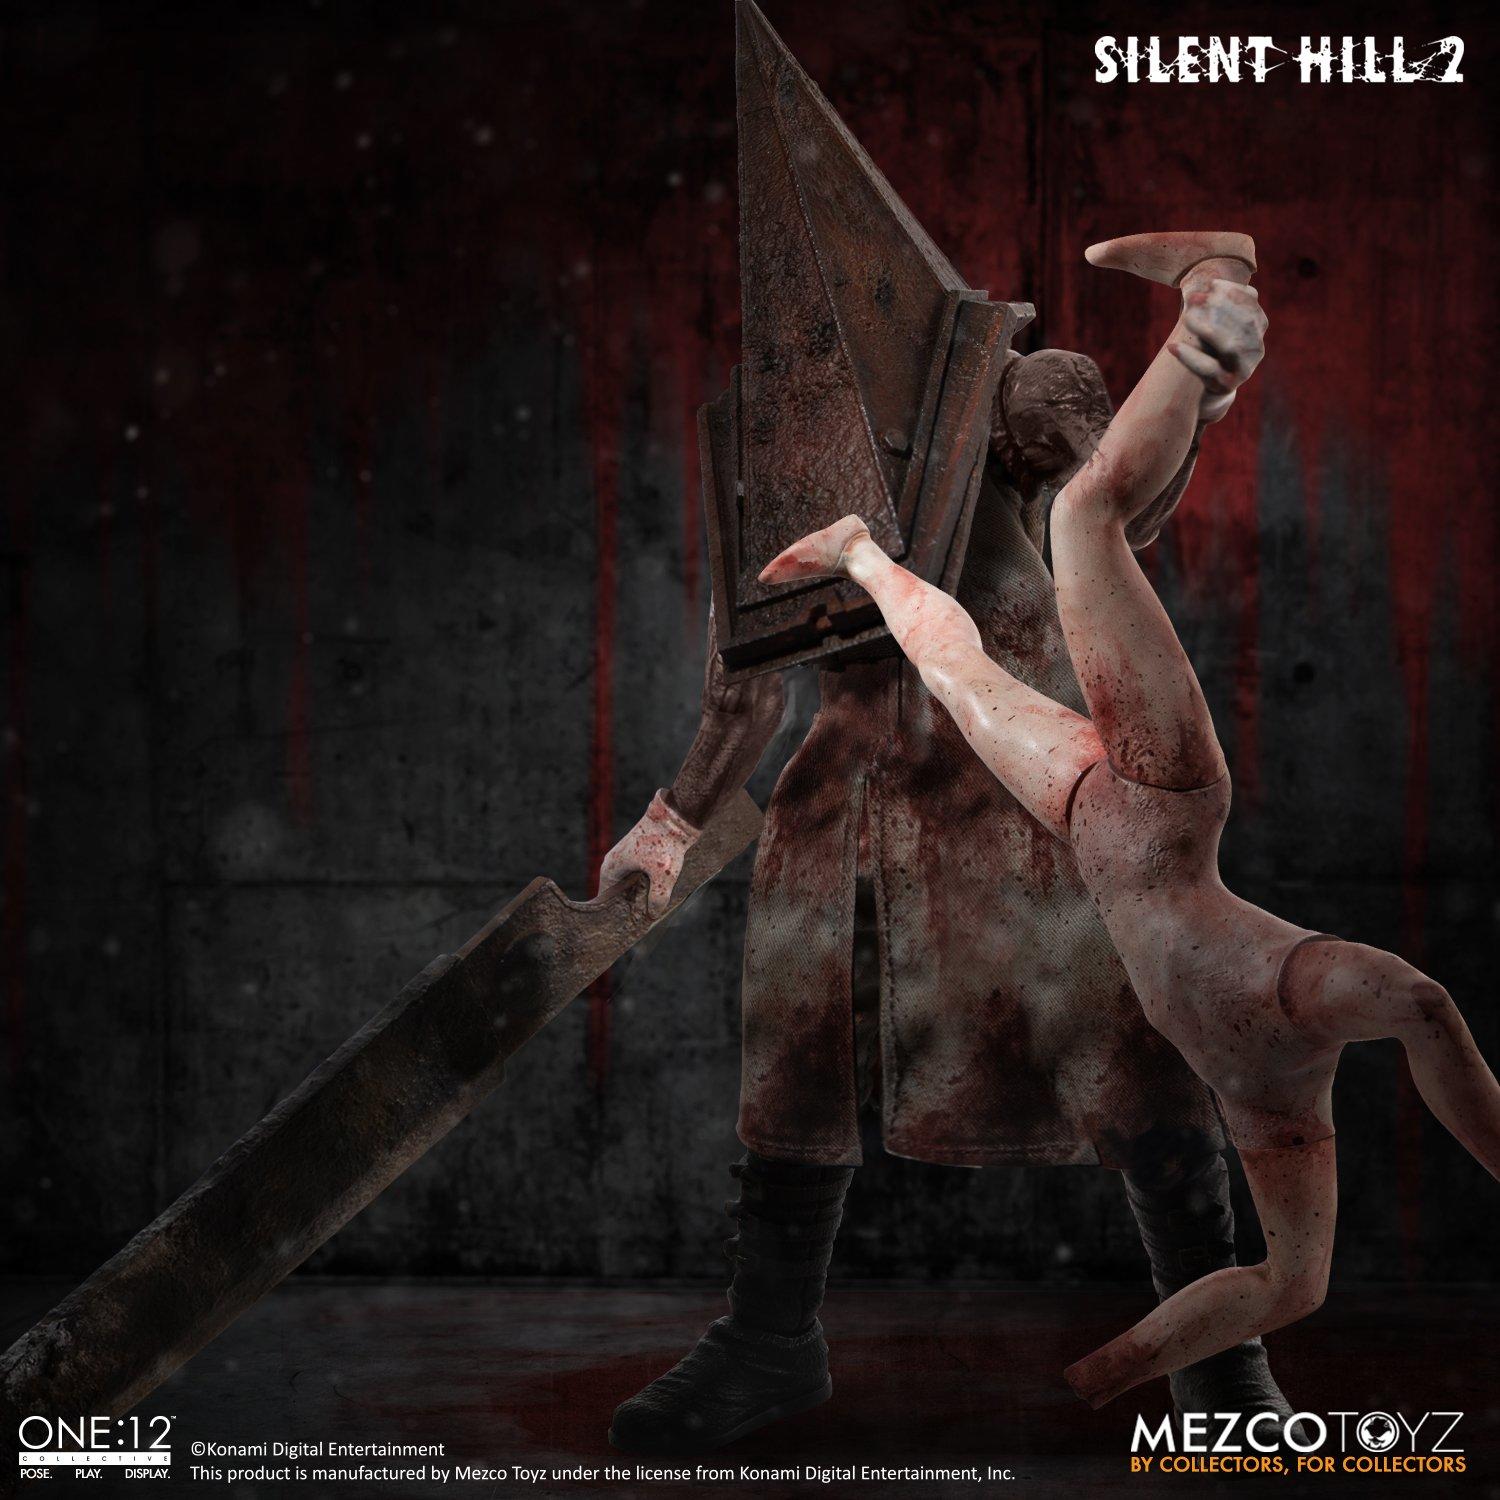 Dekan sensor etisk Silent Hill 2: Red Pyramid Thing Mezco Toyz One:12 Figure Pre-Orders are  Live